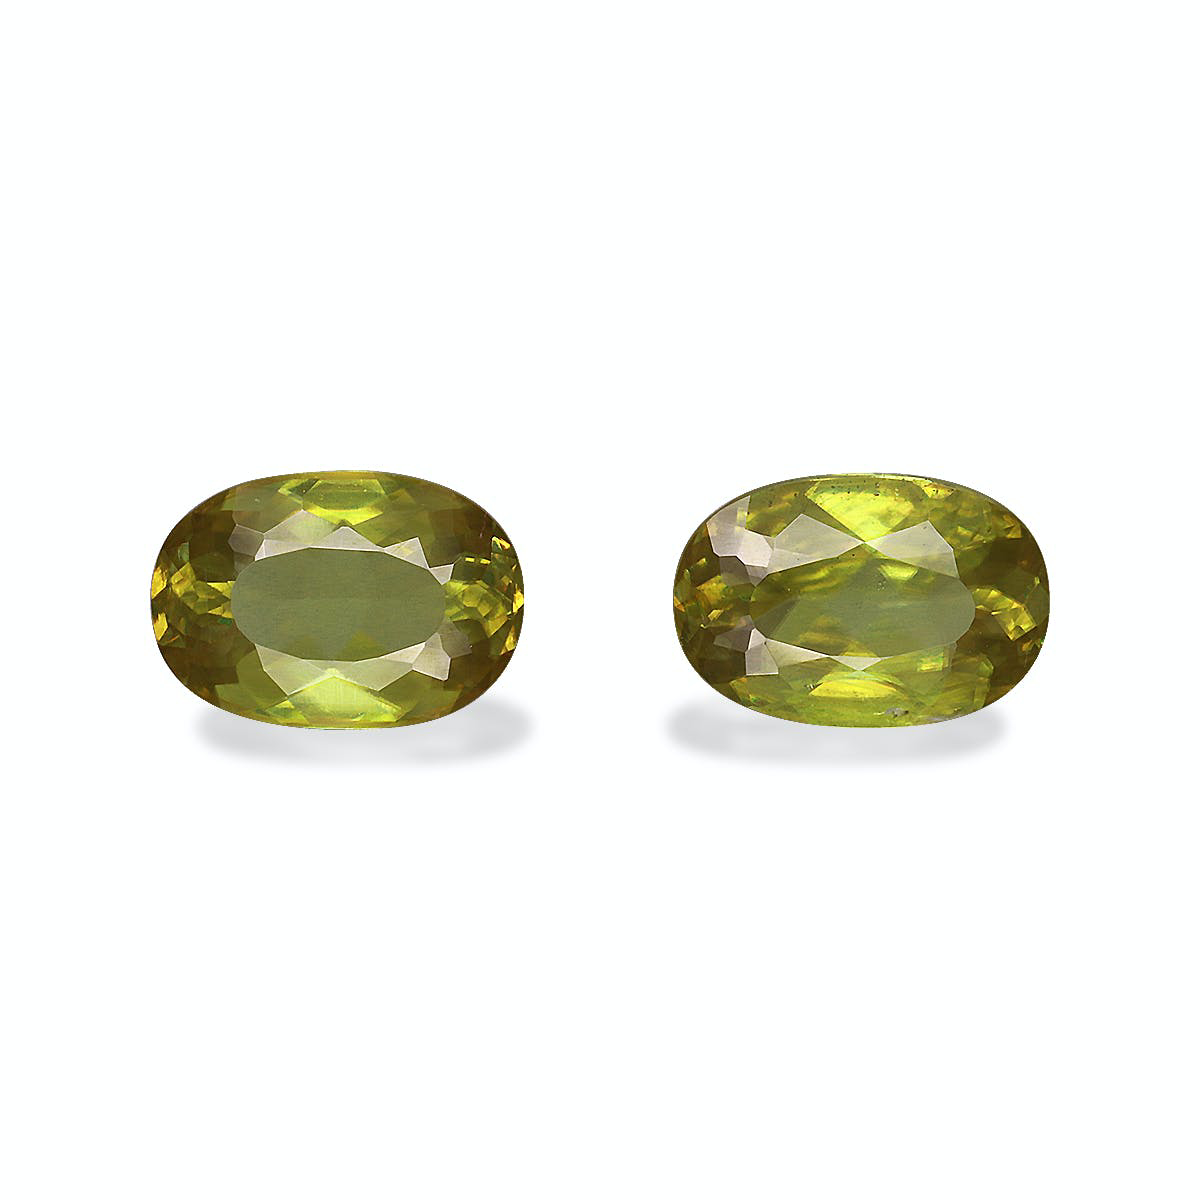 Picture of Lime Green Sphene 3.10ct - Pair (SH0698)